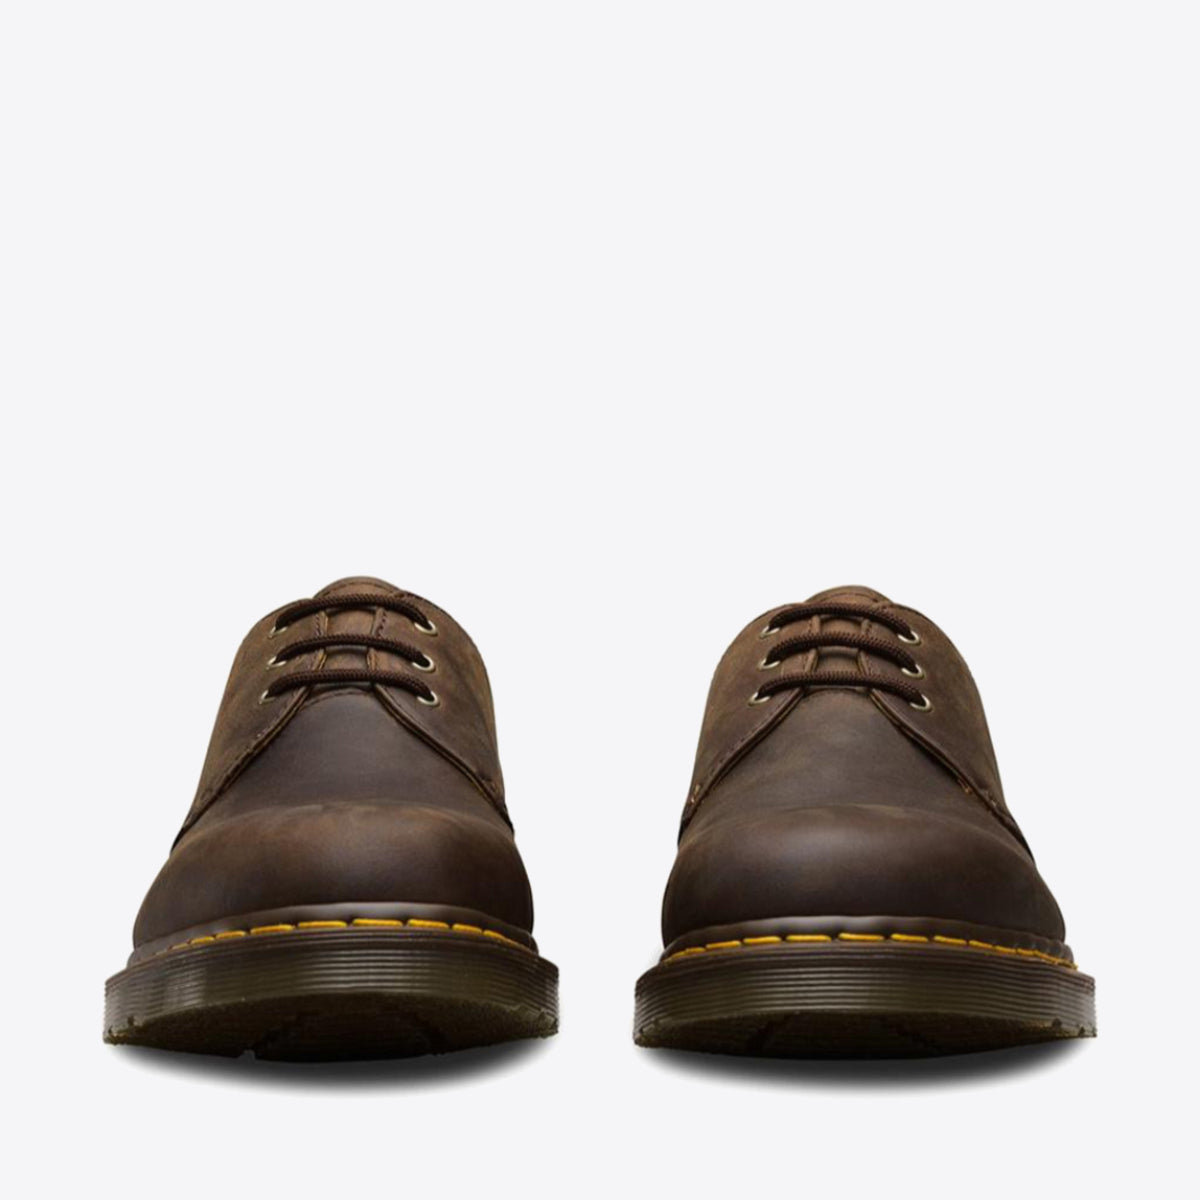 Dr Martens Shoe Care Tips from Pat Menzies Shoes 